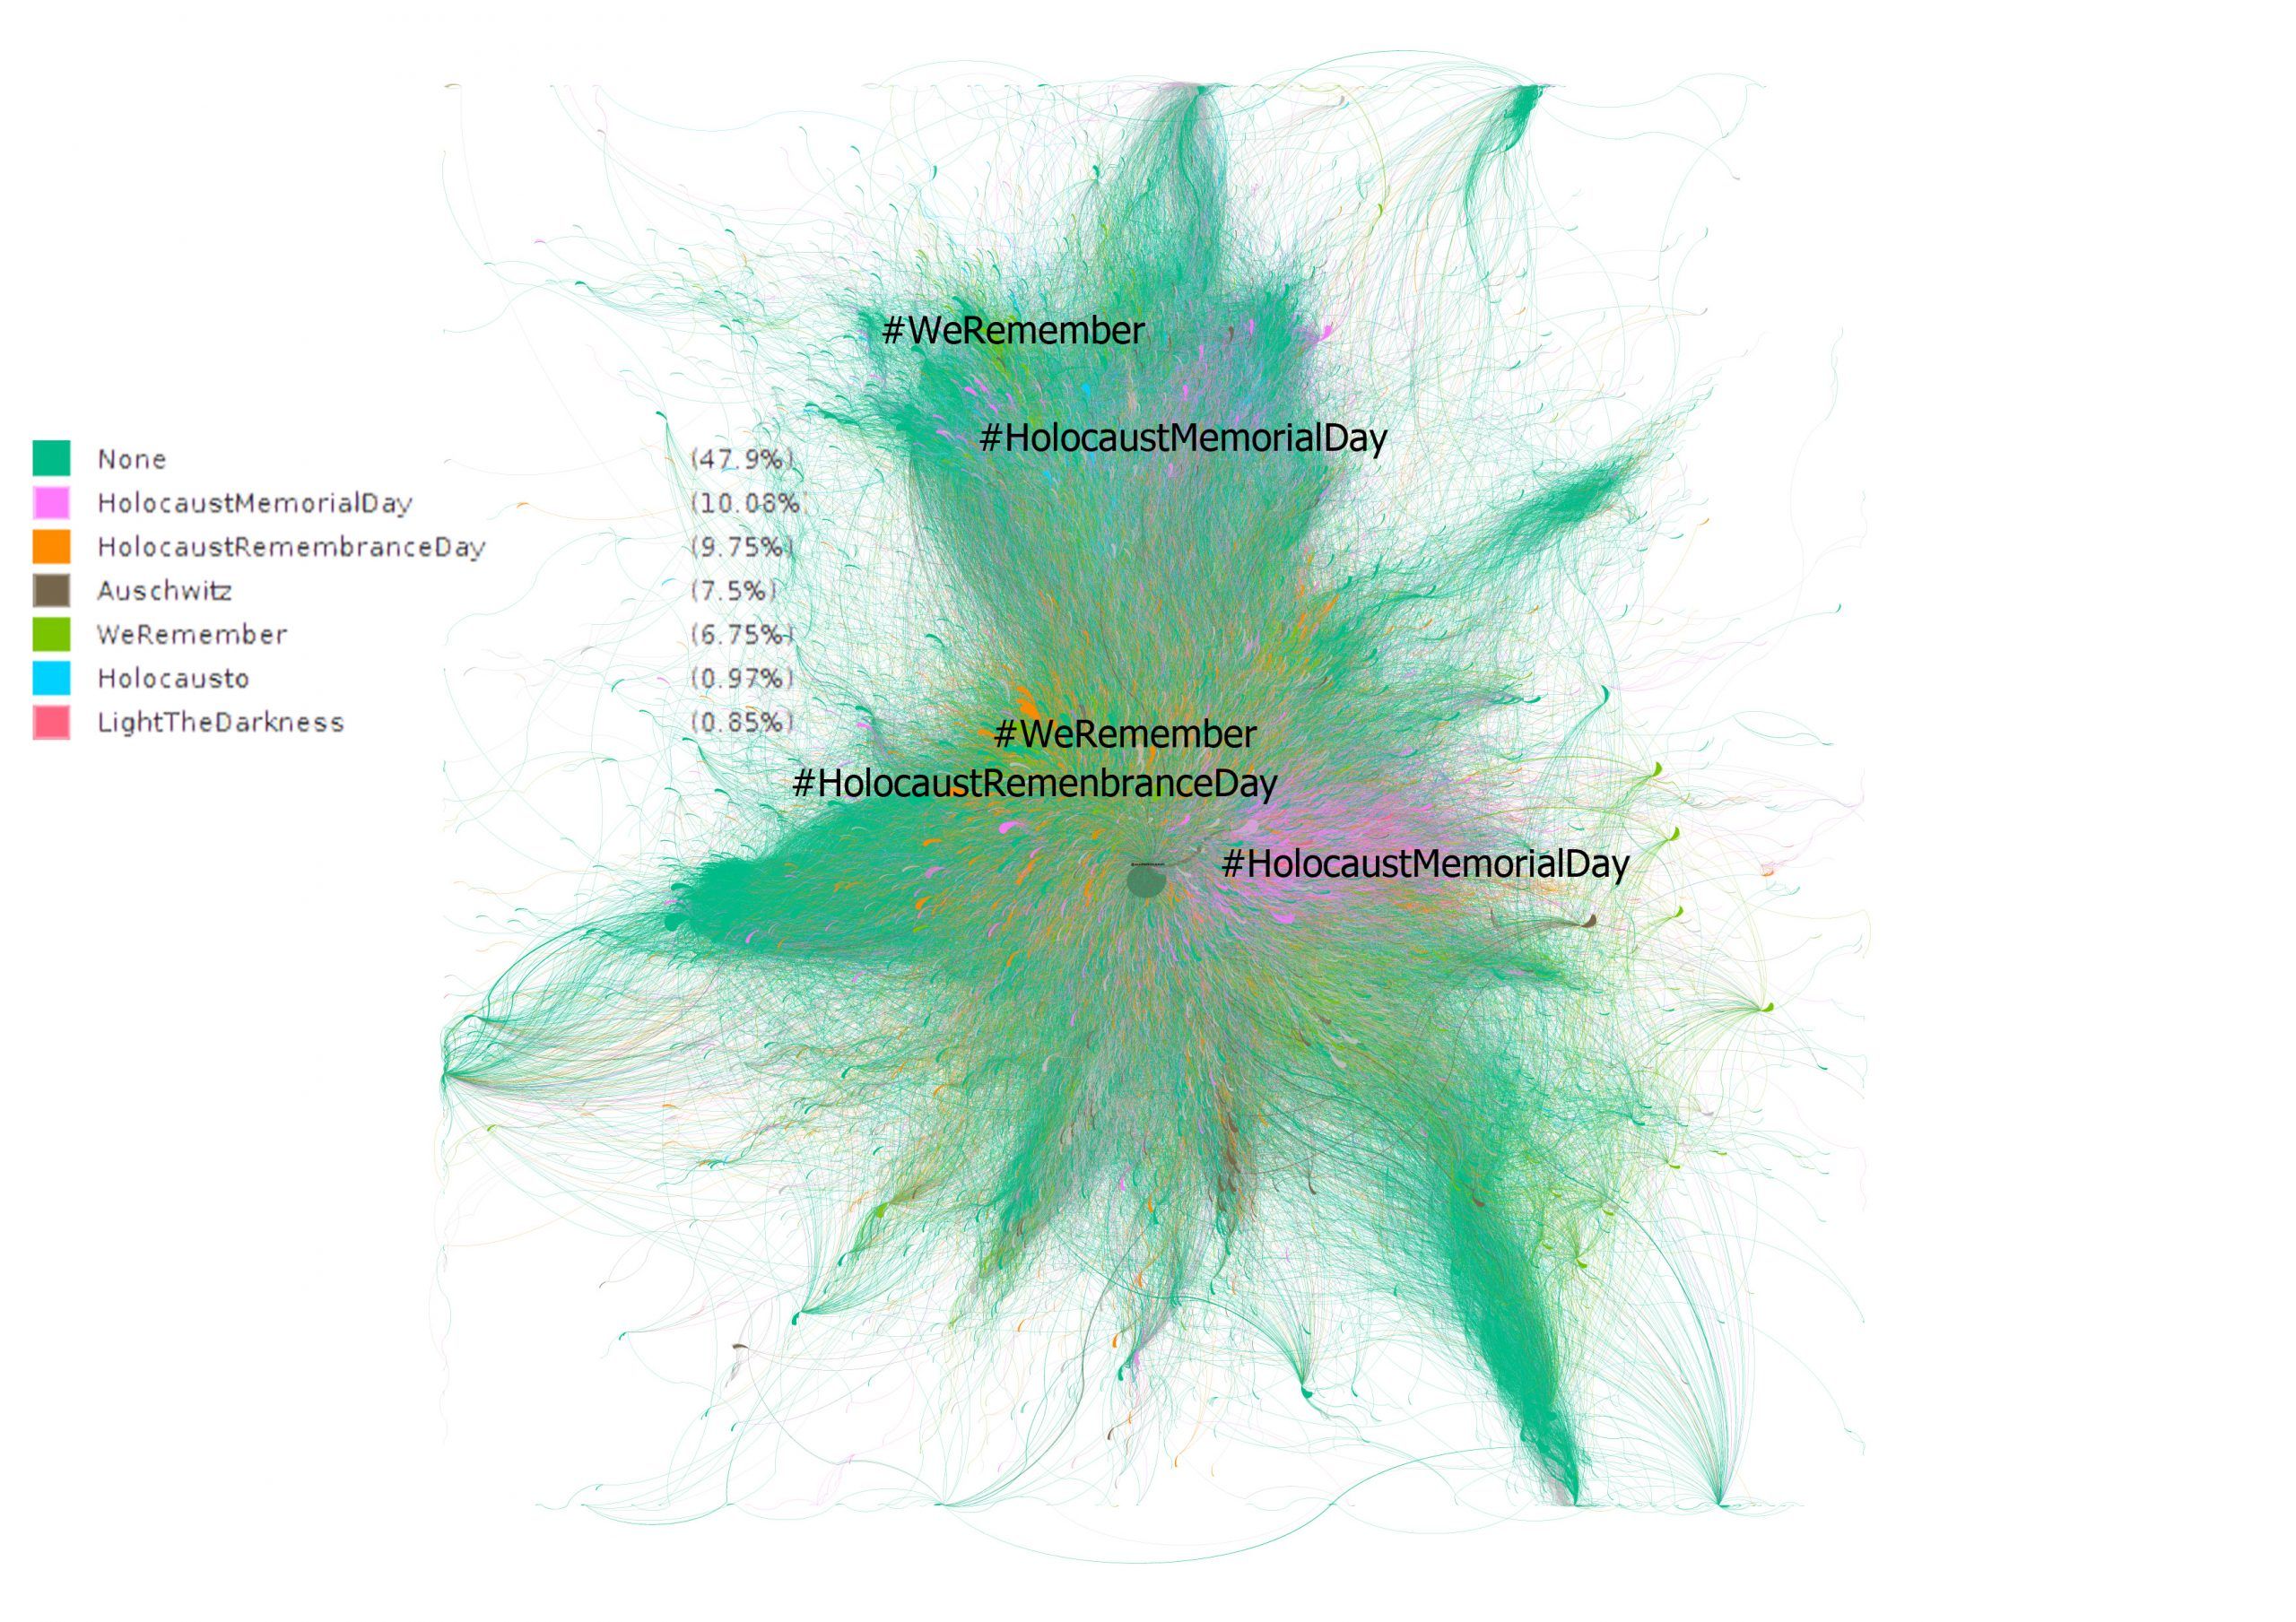 GRAPH 4. USE OF HASHTAGS BY COMMUNITIES